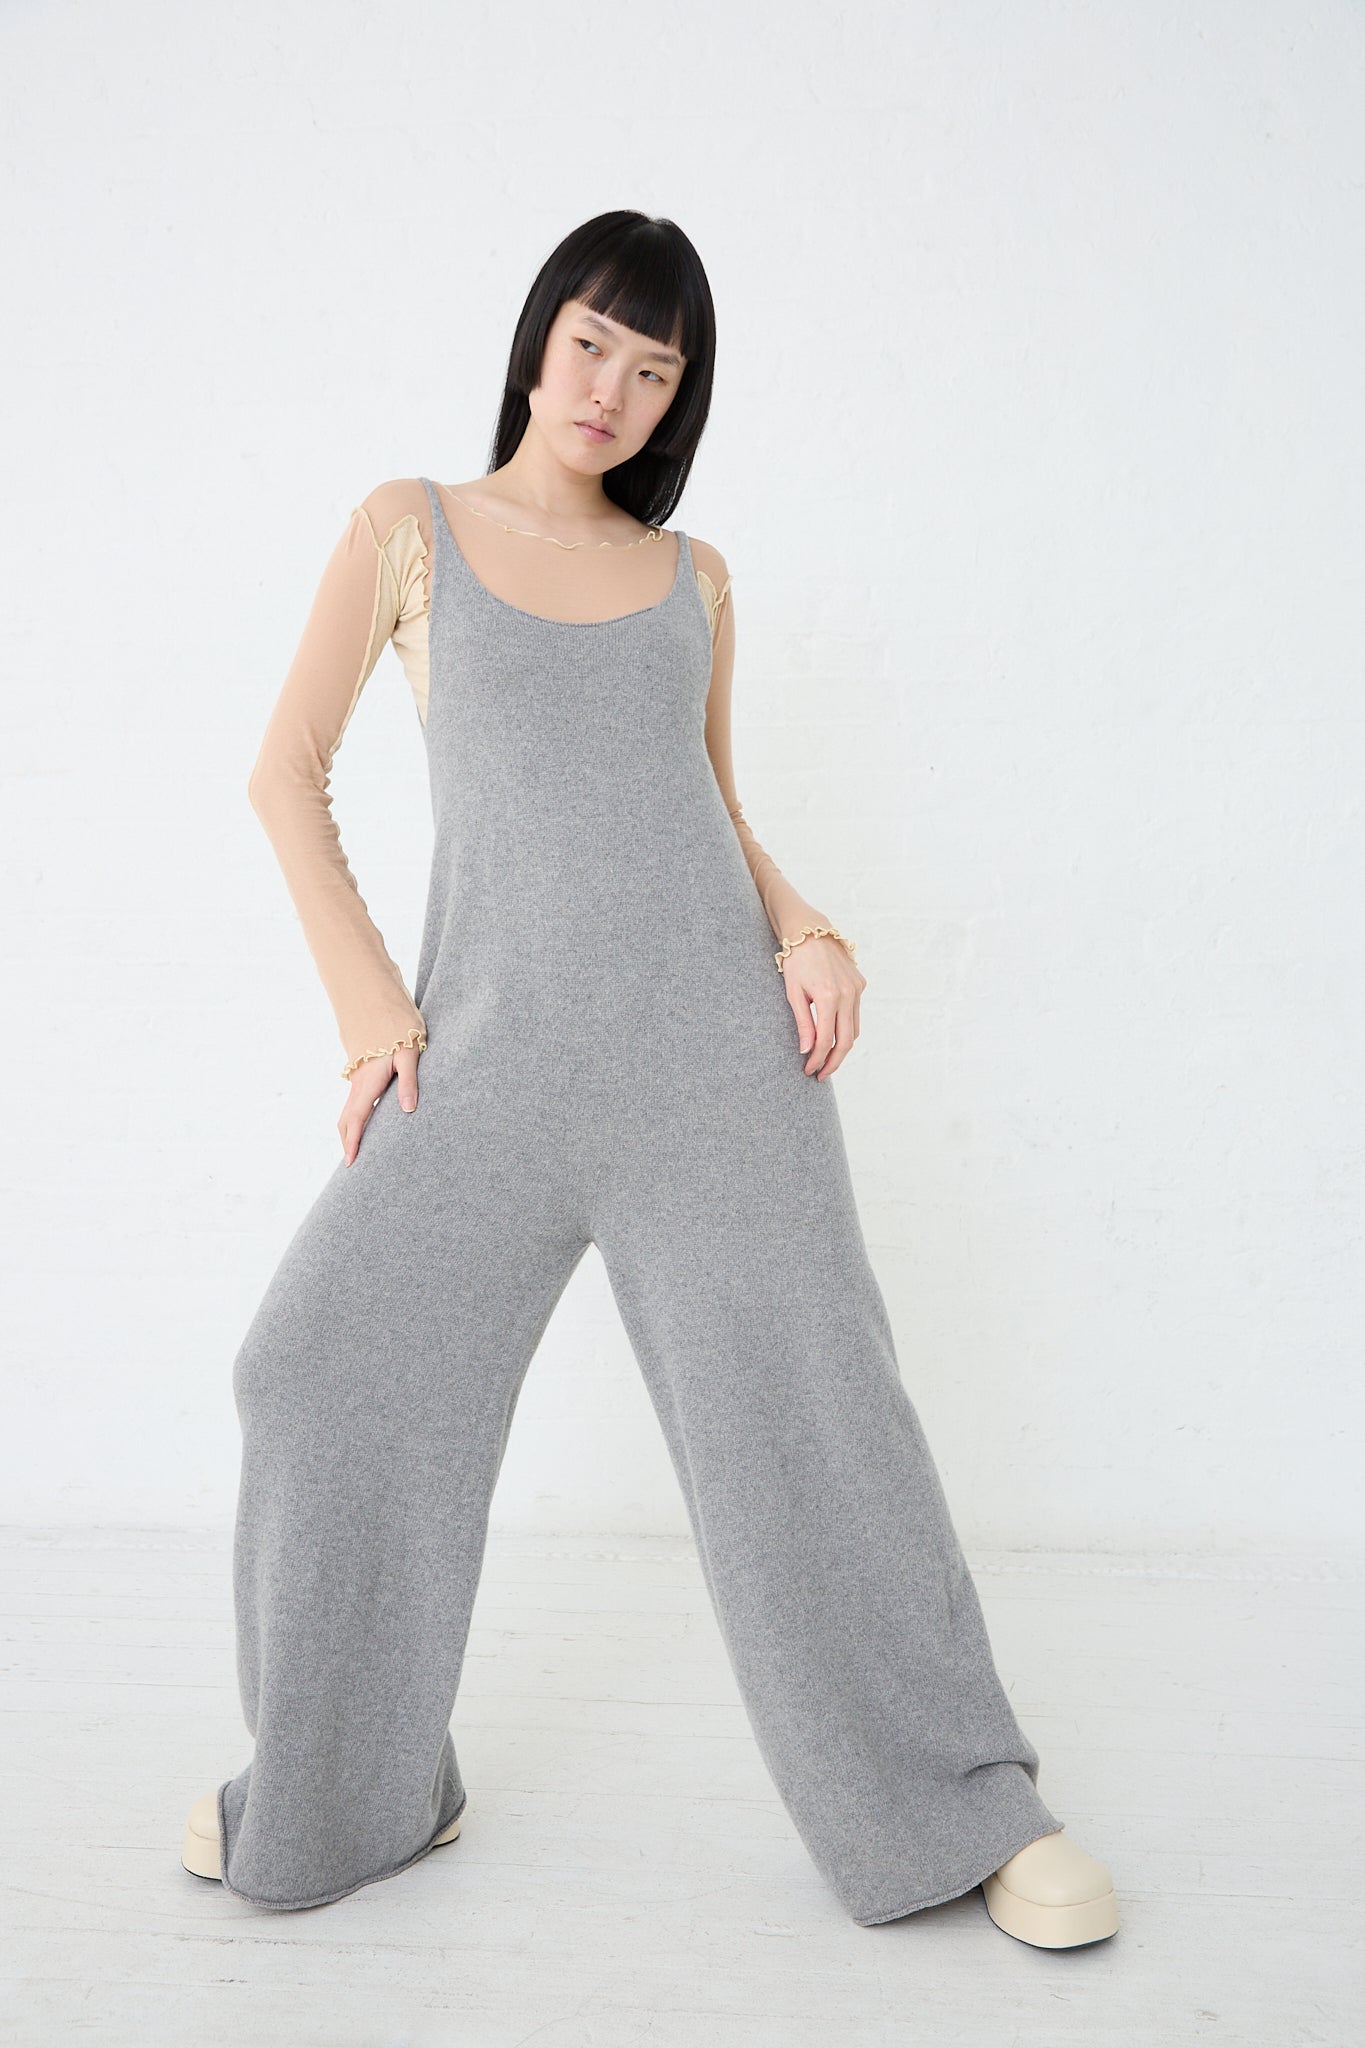 A woman is posing in a Baserange Recycled Cashmere Rim Tank Jumpsuit in Grey Melange.